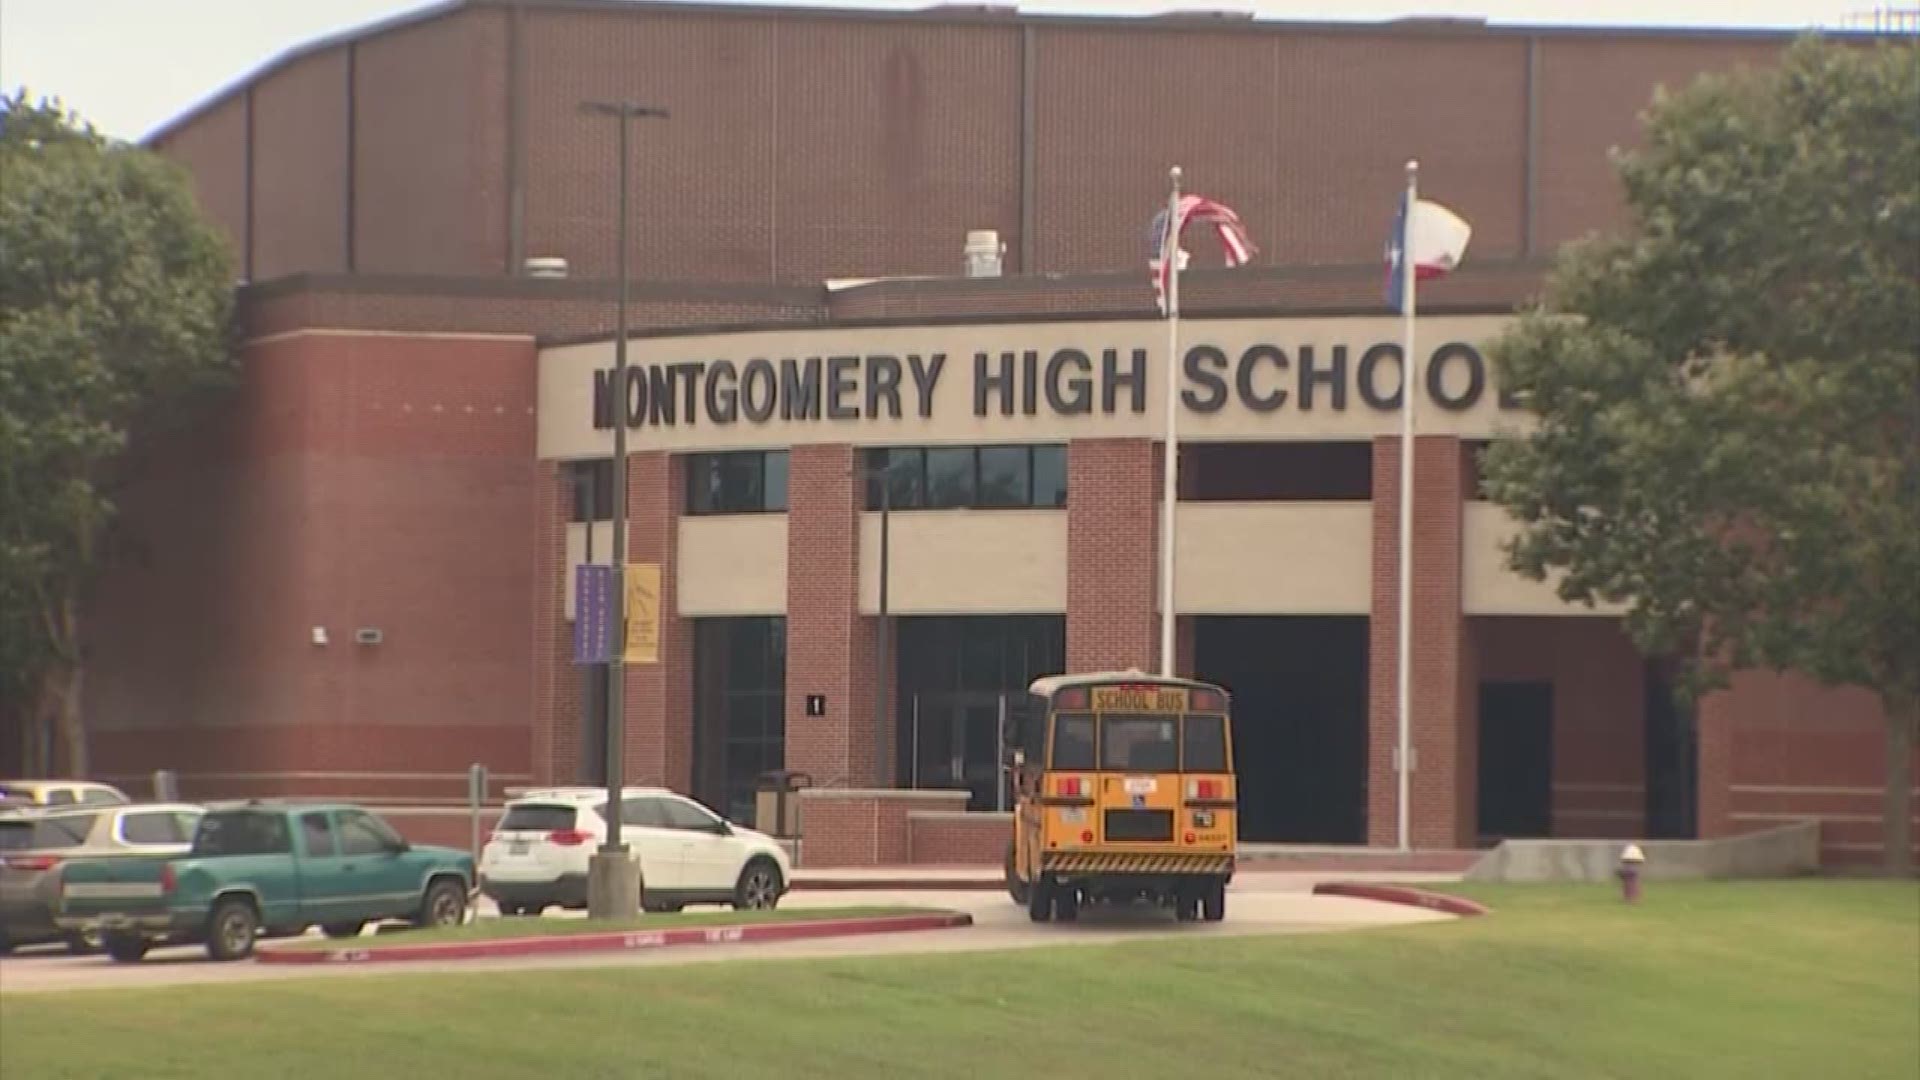 The Montgomery County Sheriff's Office has executed warrants in the hazing case involving Montgomery High School students.